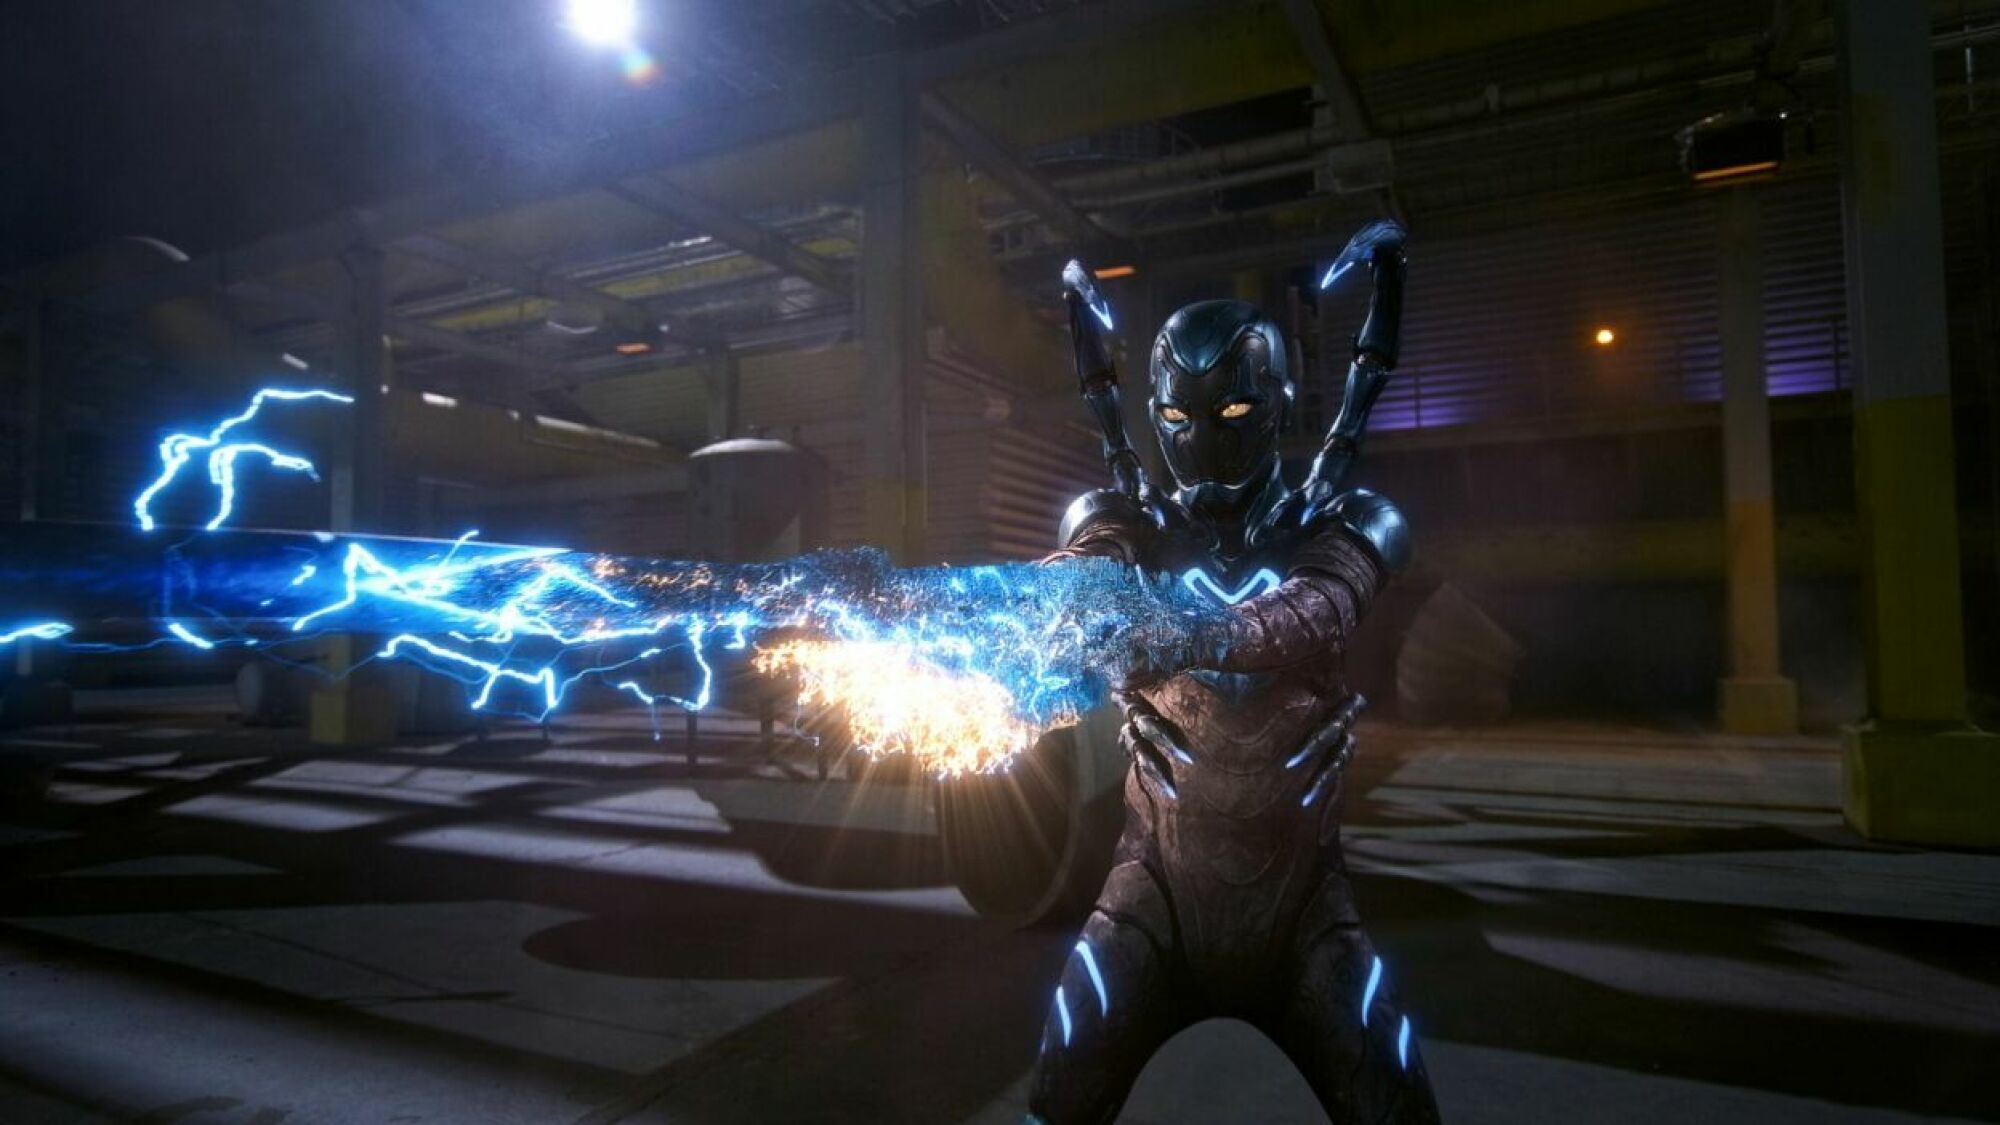 An armored superhero shoots out a blue laser. 